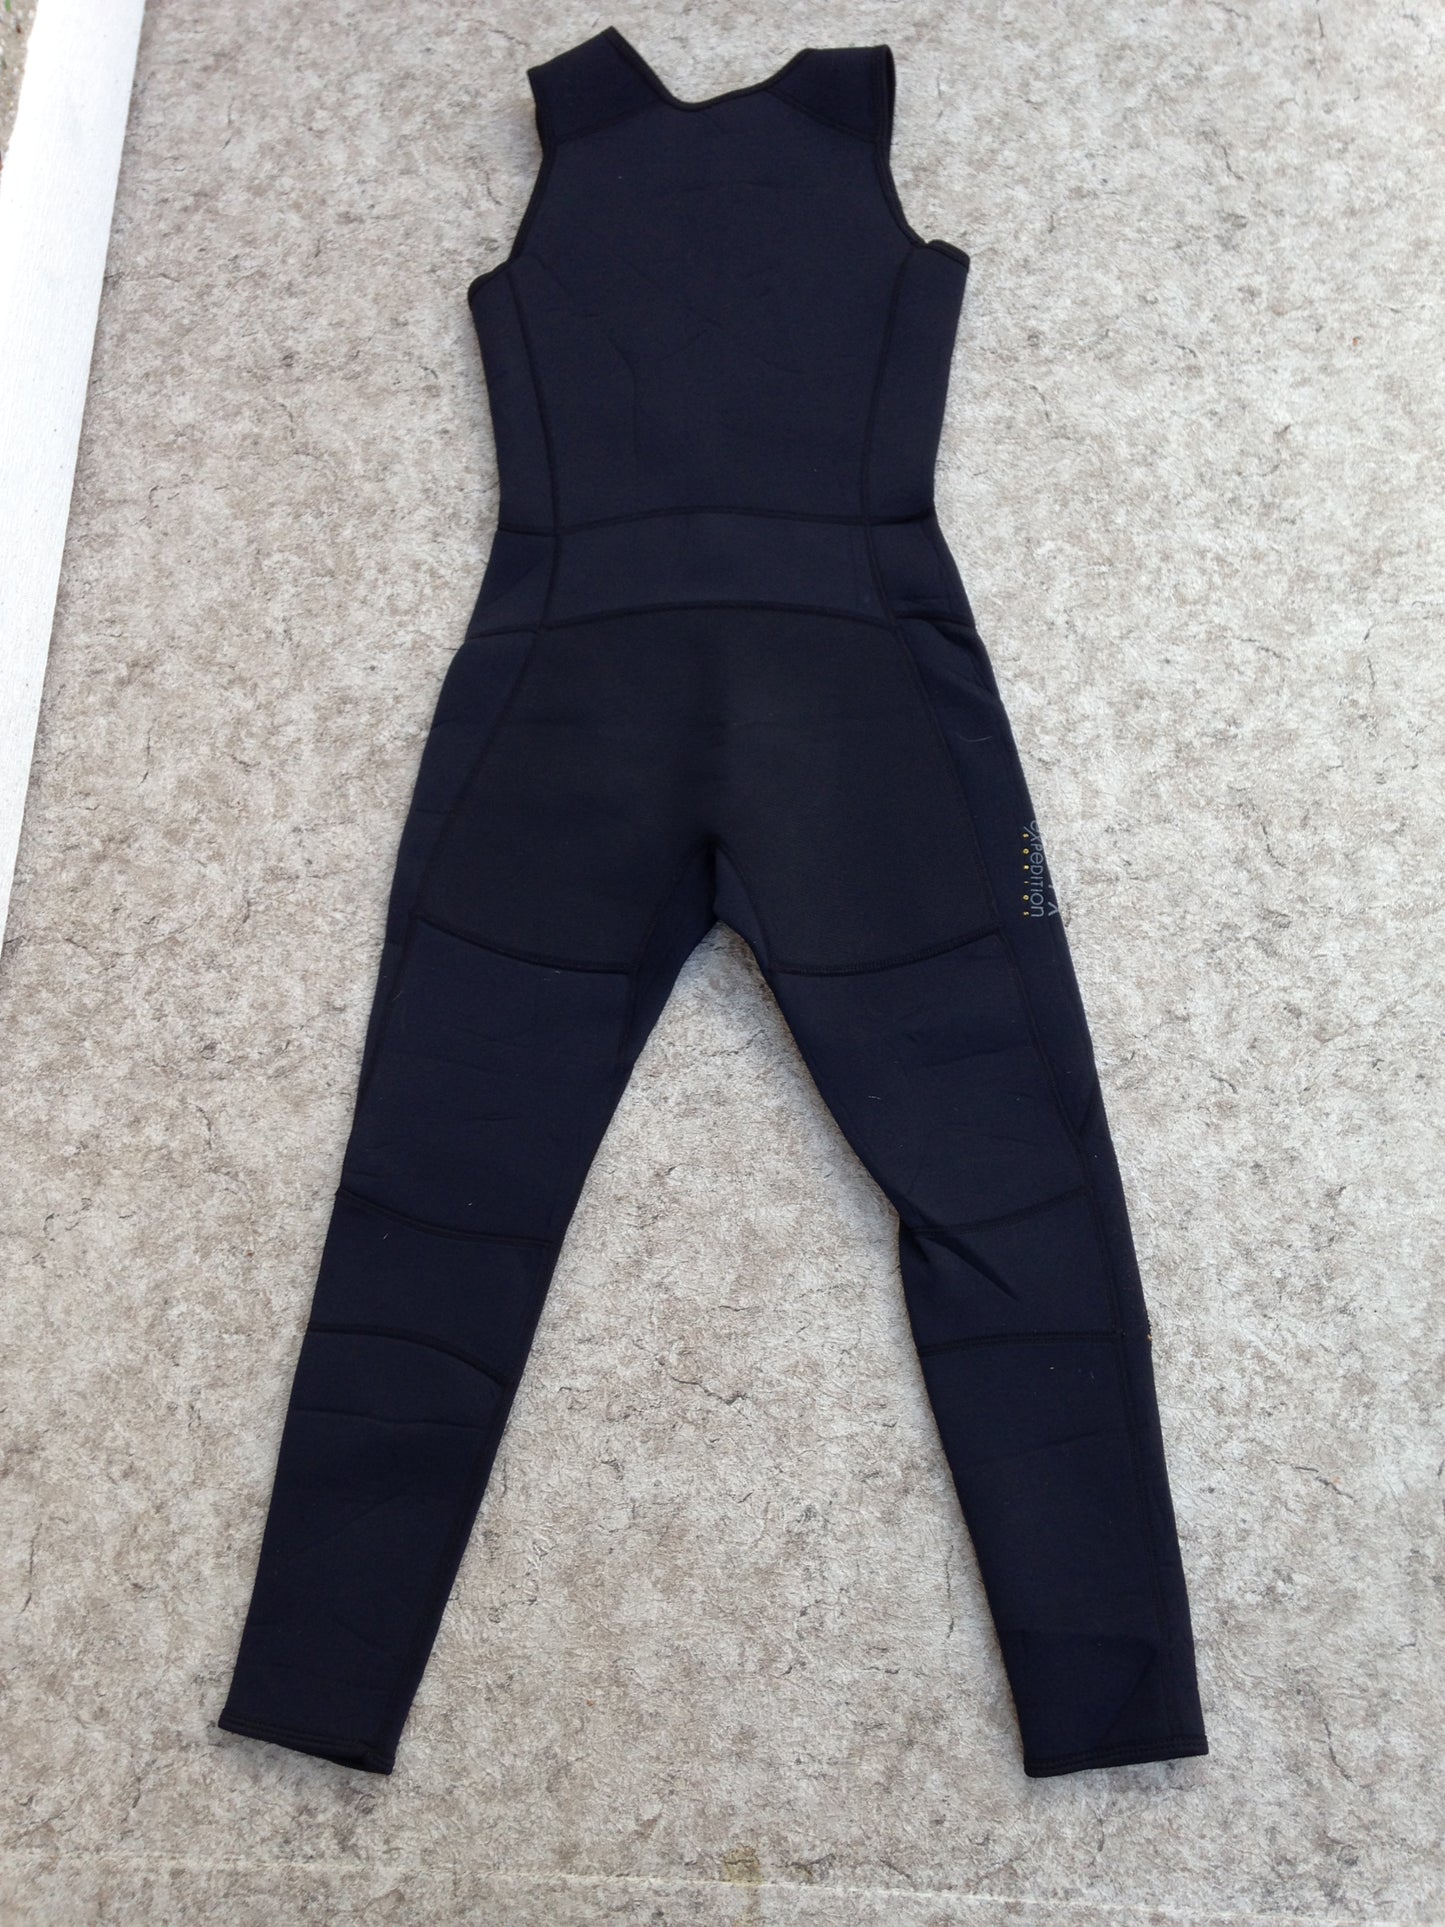 Wetsuit Ladies Size Small Full John 2-3 mm Level Six Black Excellent